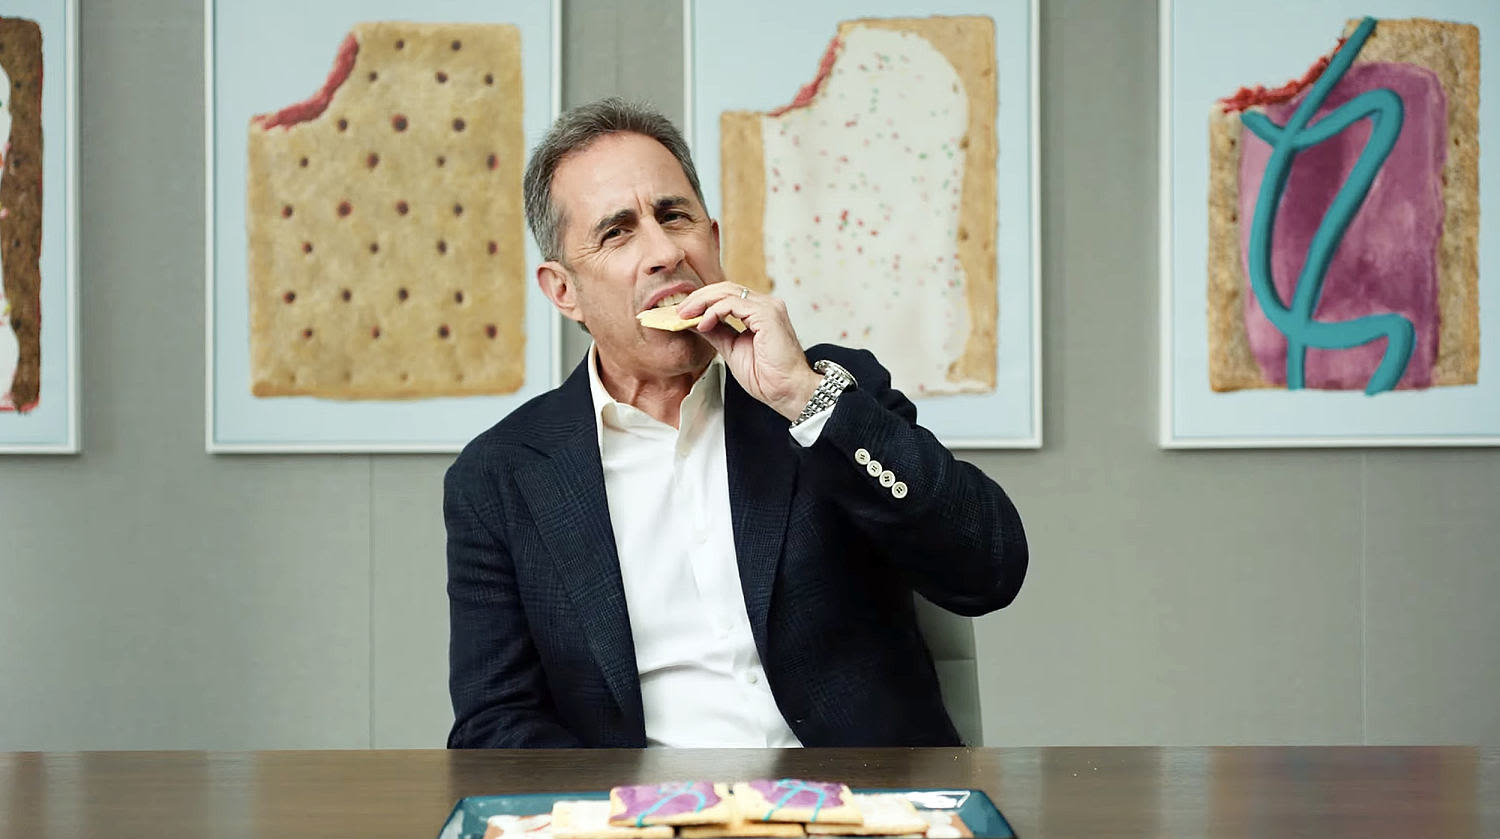 Jerry Seinfeld takes a jab at 'Friends' in new video for his Pop-Tarts movie